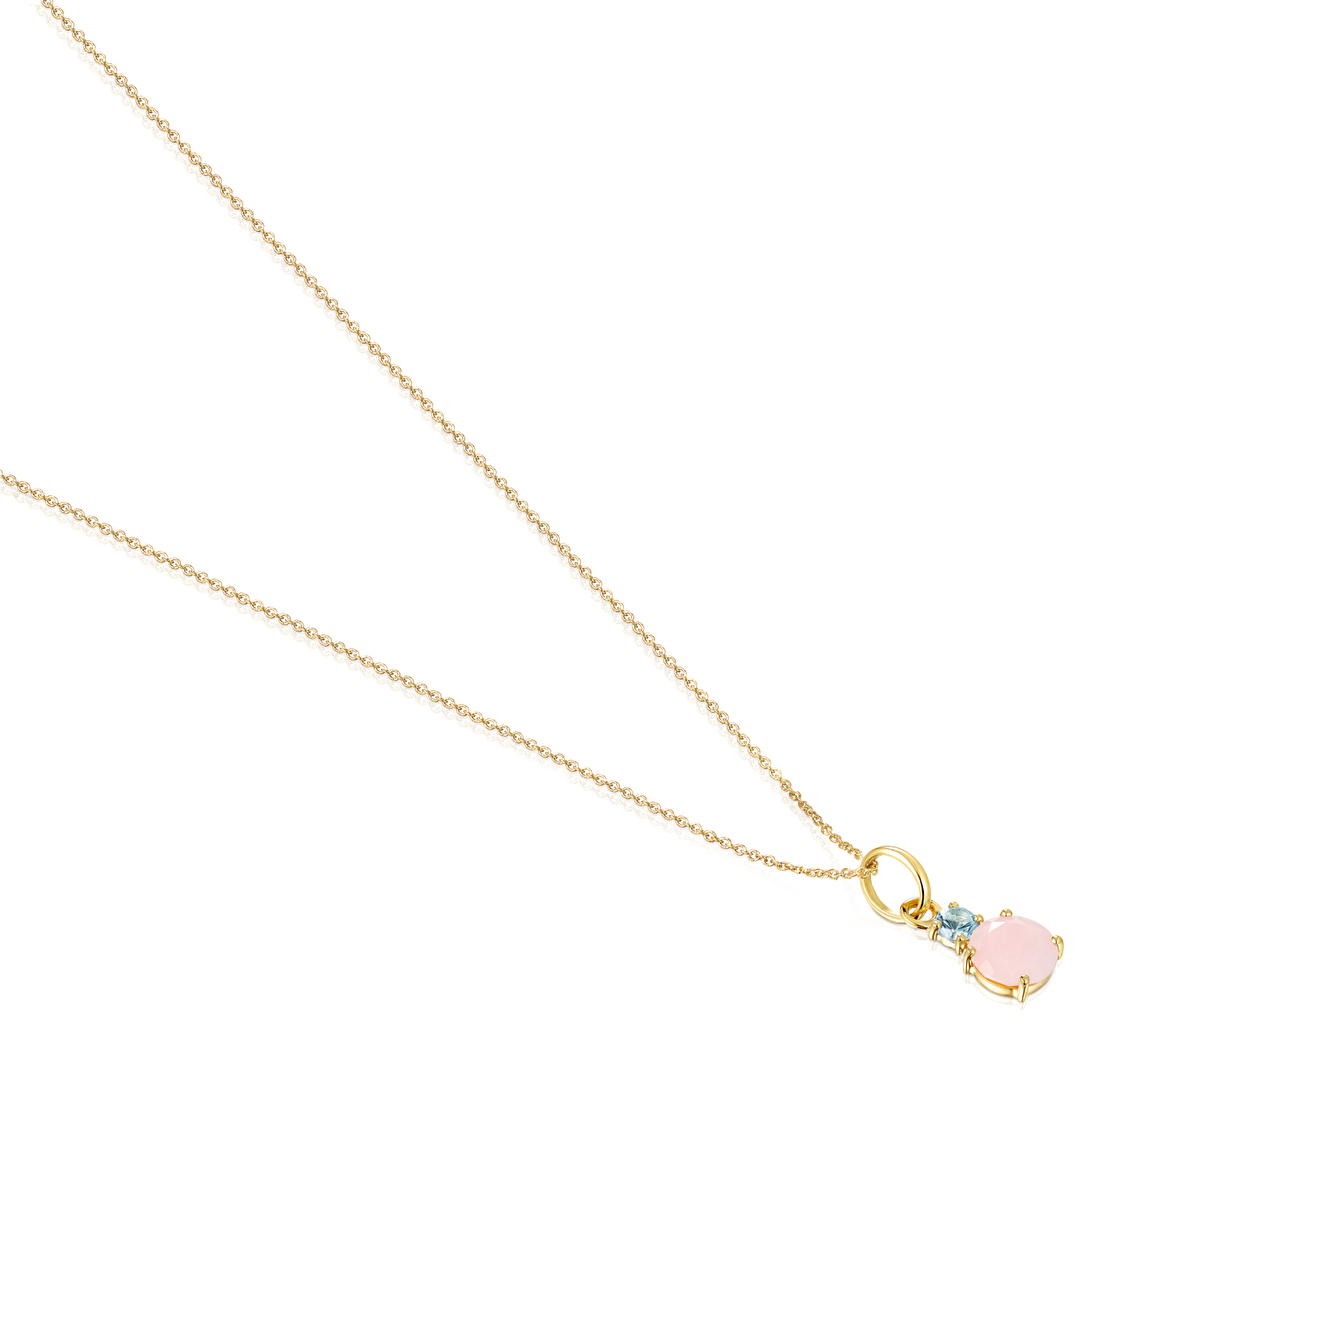 Mini Ivette necklace in yellow gold with opal and topaz – buy at Poison  Drop online store, SKU